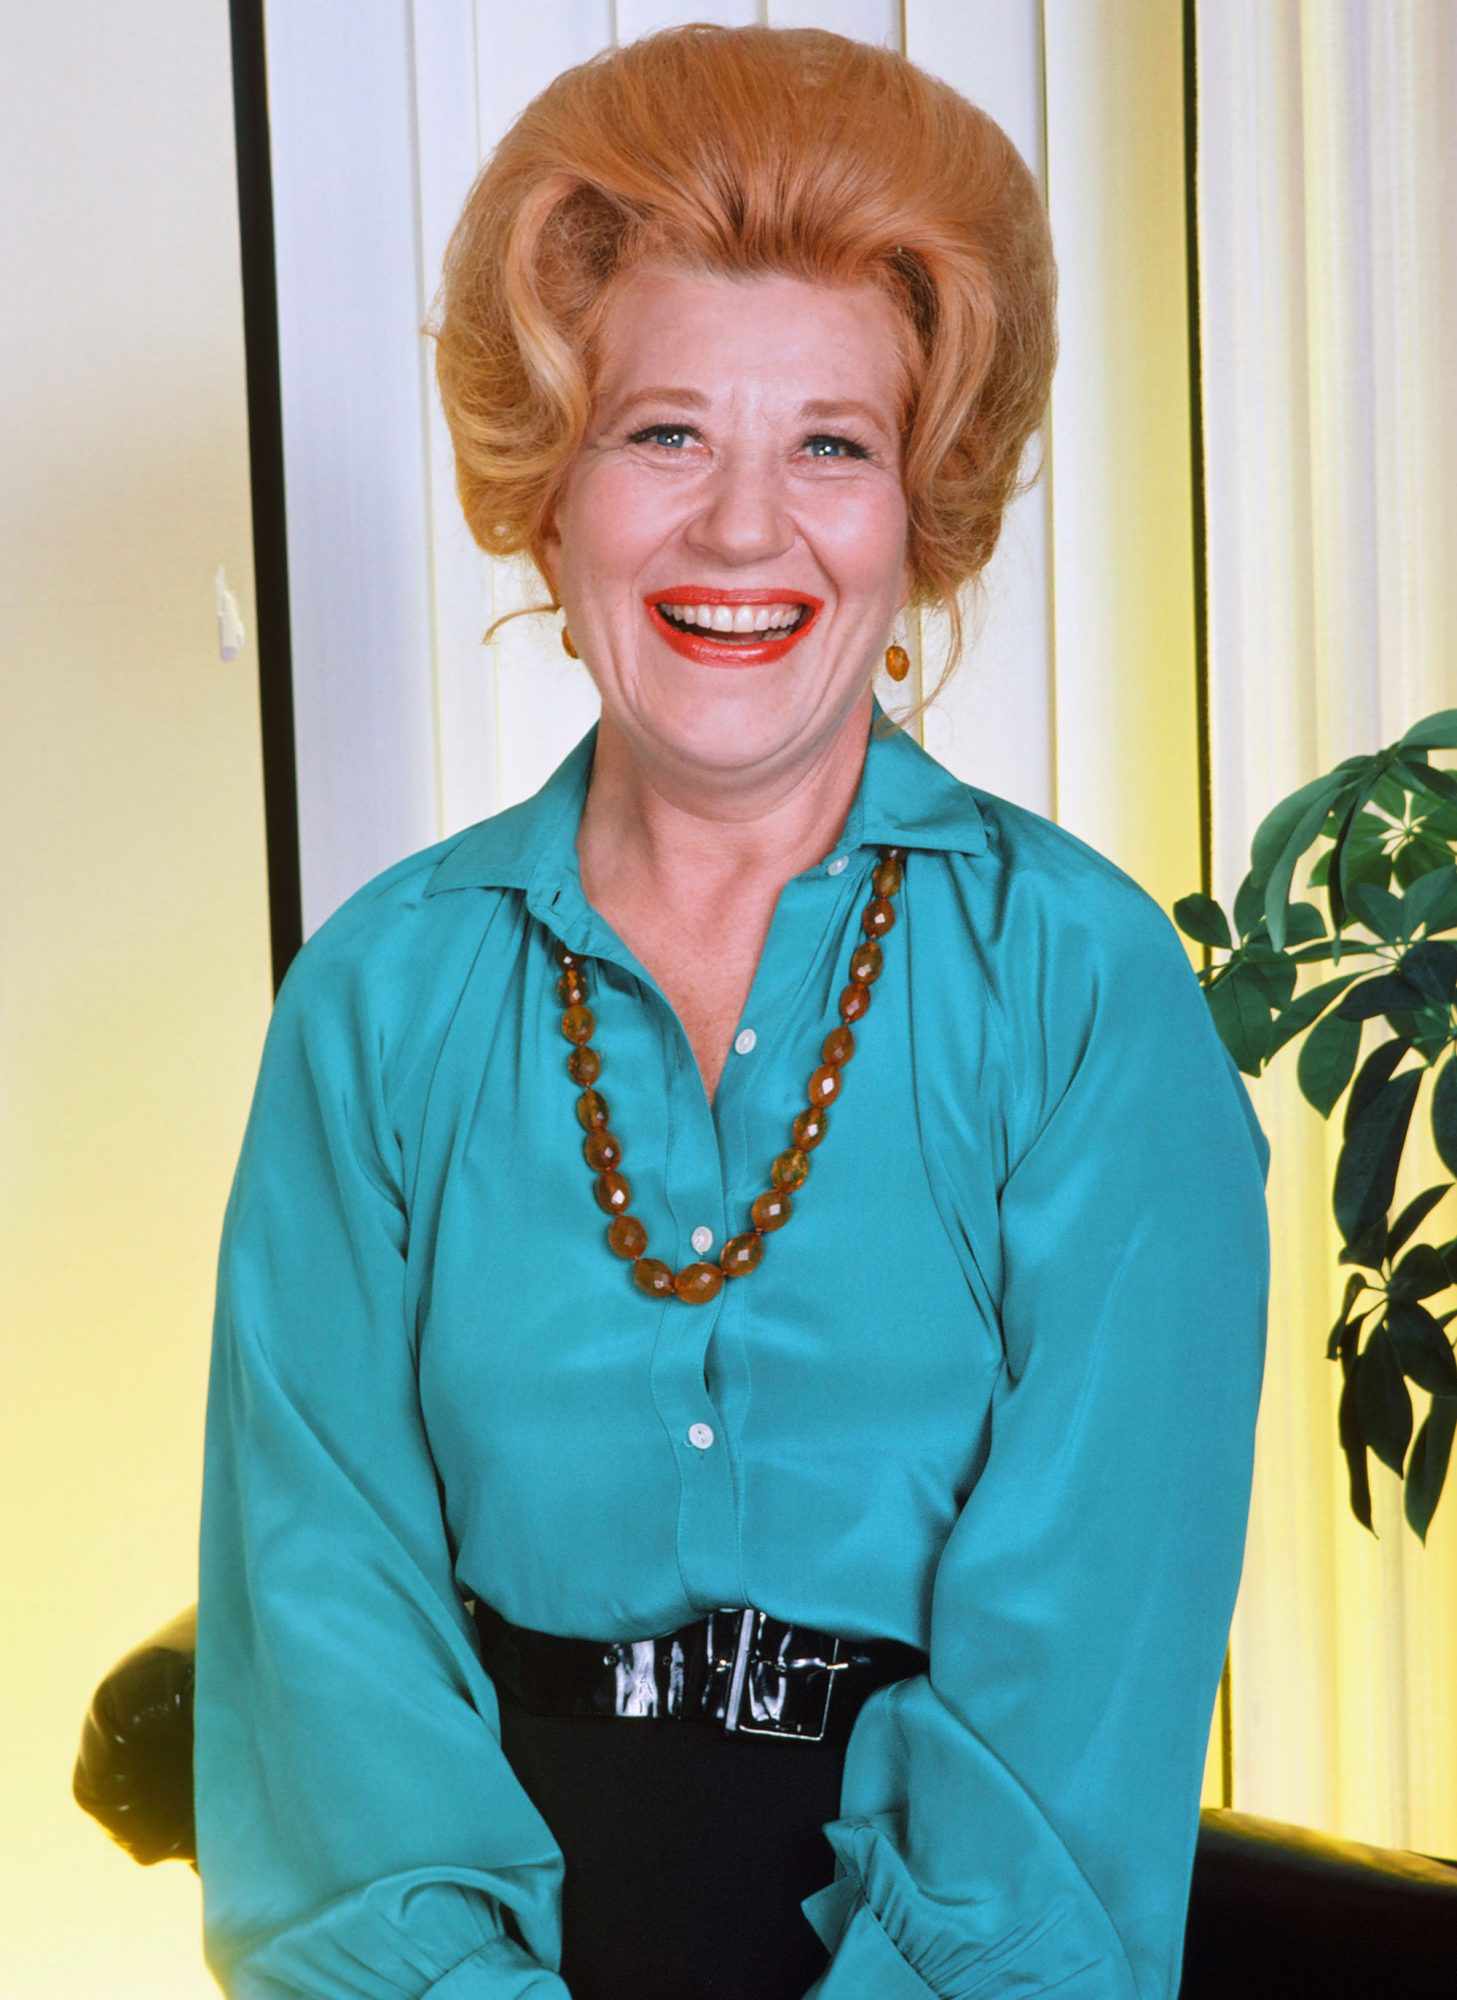 <p>Charlotte Rae, best known as wise and lovable house mother Mrs. Garrett on Diff'rent Strokes and The Facts of Life, died Aug. 5 at her home in Los Angeles, her reps confirmed to Entertainment Weekly. She was 92.</p>
                            <p>Rae revealed she'd been diagnosed with bone cancer at the end of April 2017. "Last Monday, I found out I have bone cancer," the actress exclusively revealed to PEOPLE. "About seven years ago, I was diagnosed with pancreatic cancer - which is a miracle that they found it because usually it's too late. My mother, sister and my uncle died of pancreatic cancer. After six months of chemotherapy, I was cancer-free. I lost my hair, but I had beautiful wigs. Nobody even knew."</p>
                            